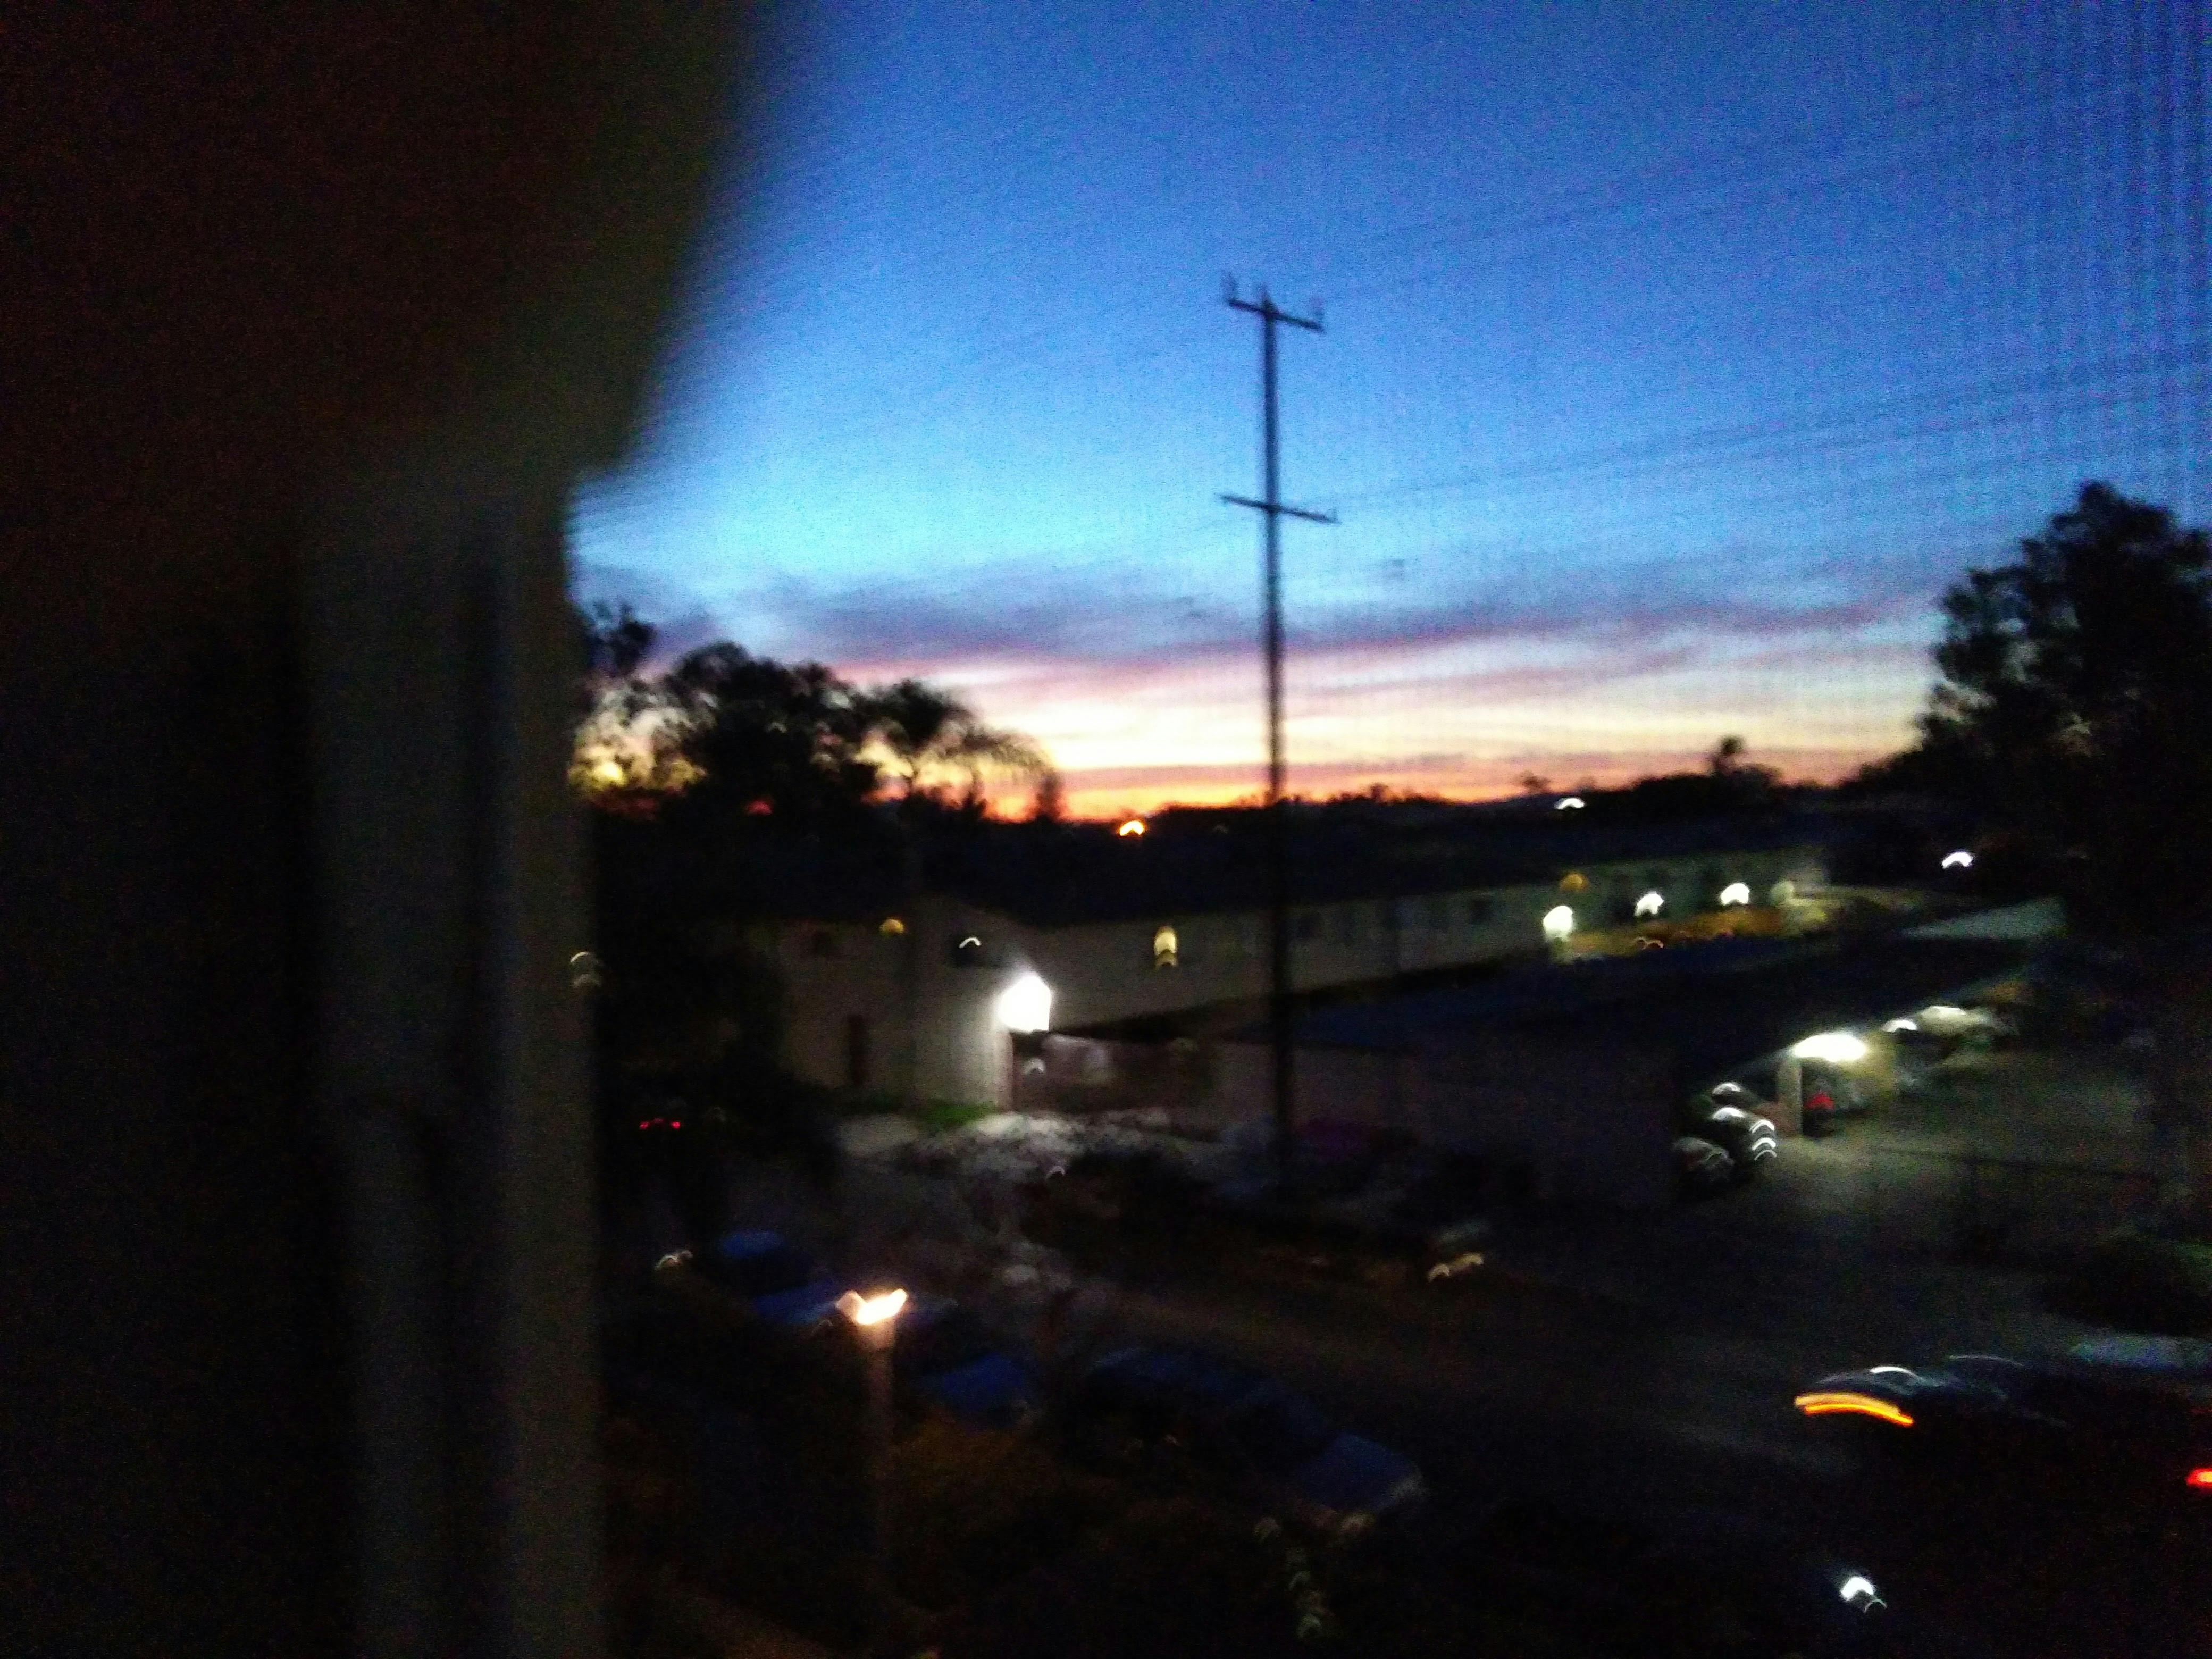 Free stock photo of Looking out of our living room window... Sunrise o